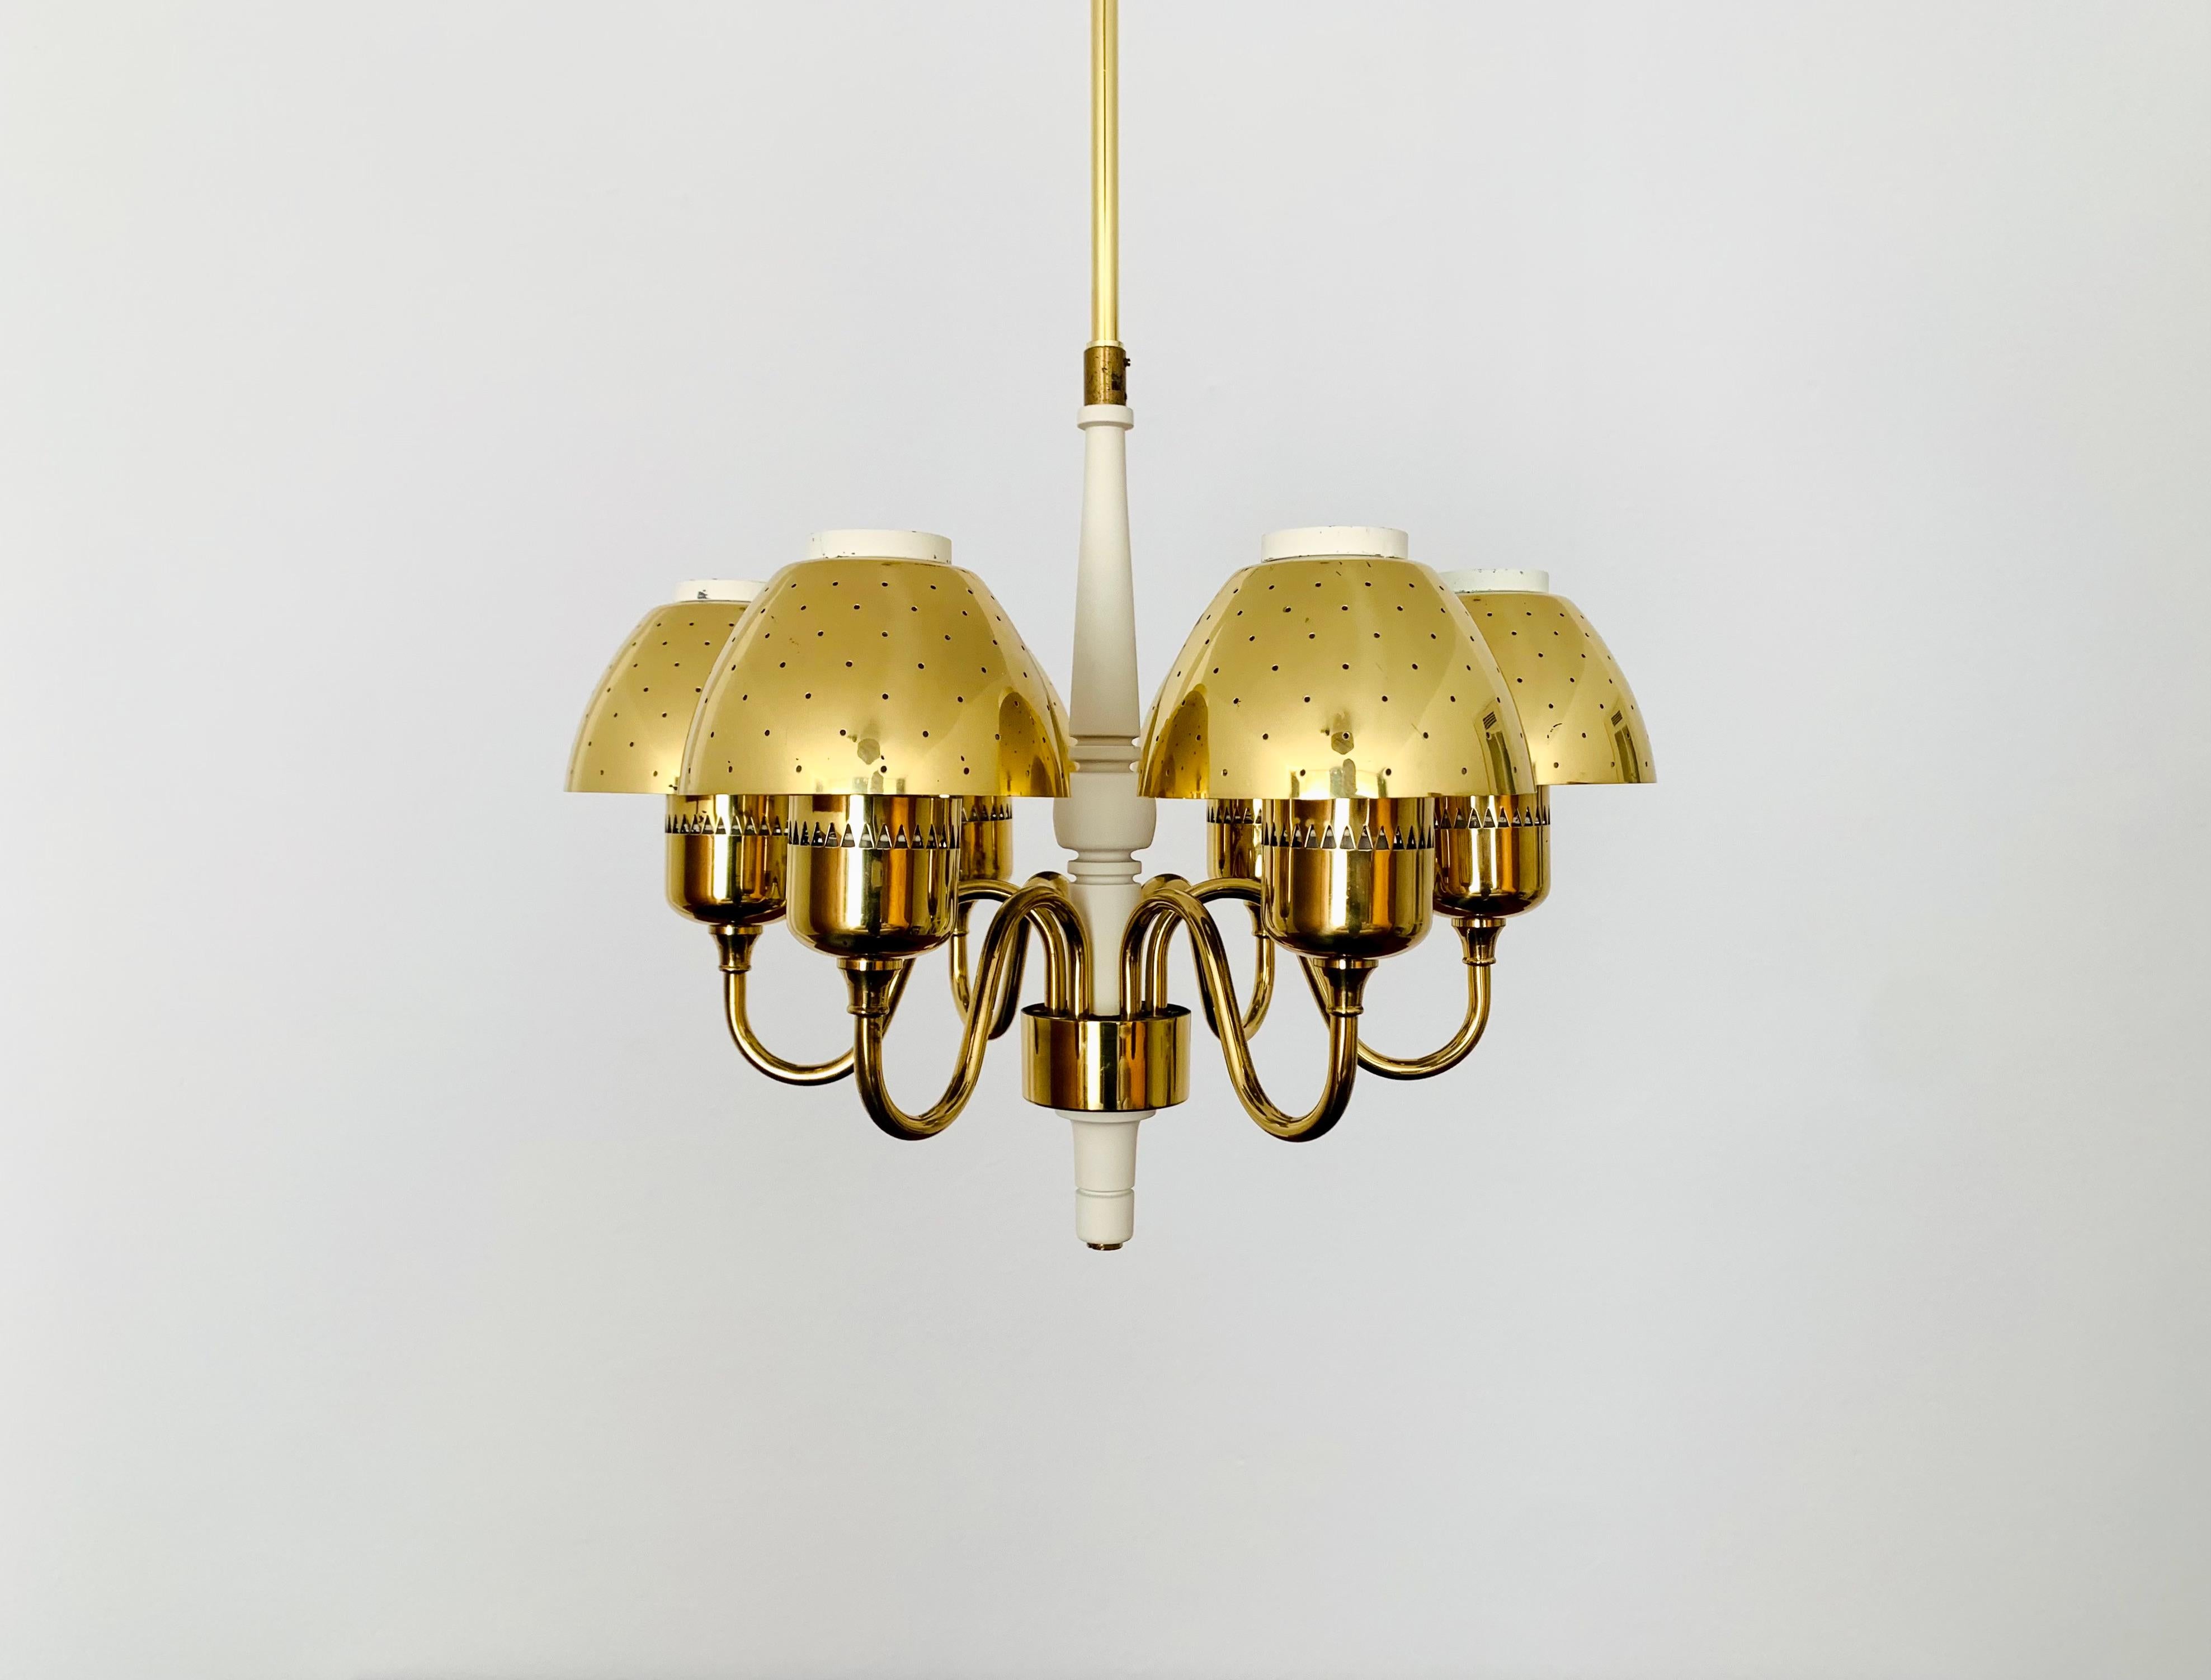 Stunning chandelier from the 1960s.
Very luxurious design and high quality workmanship.
The lamp is a real asset and an absolute favorite for every home.
A sparkling light emerges.

Design: Hans Agne Jakobsson

Condition:

Very good vintage